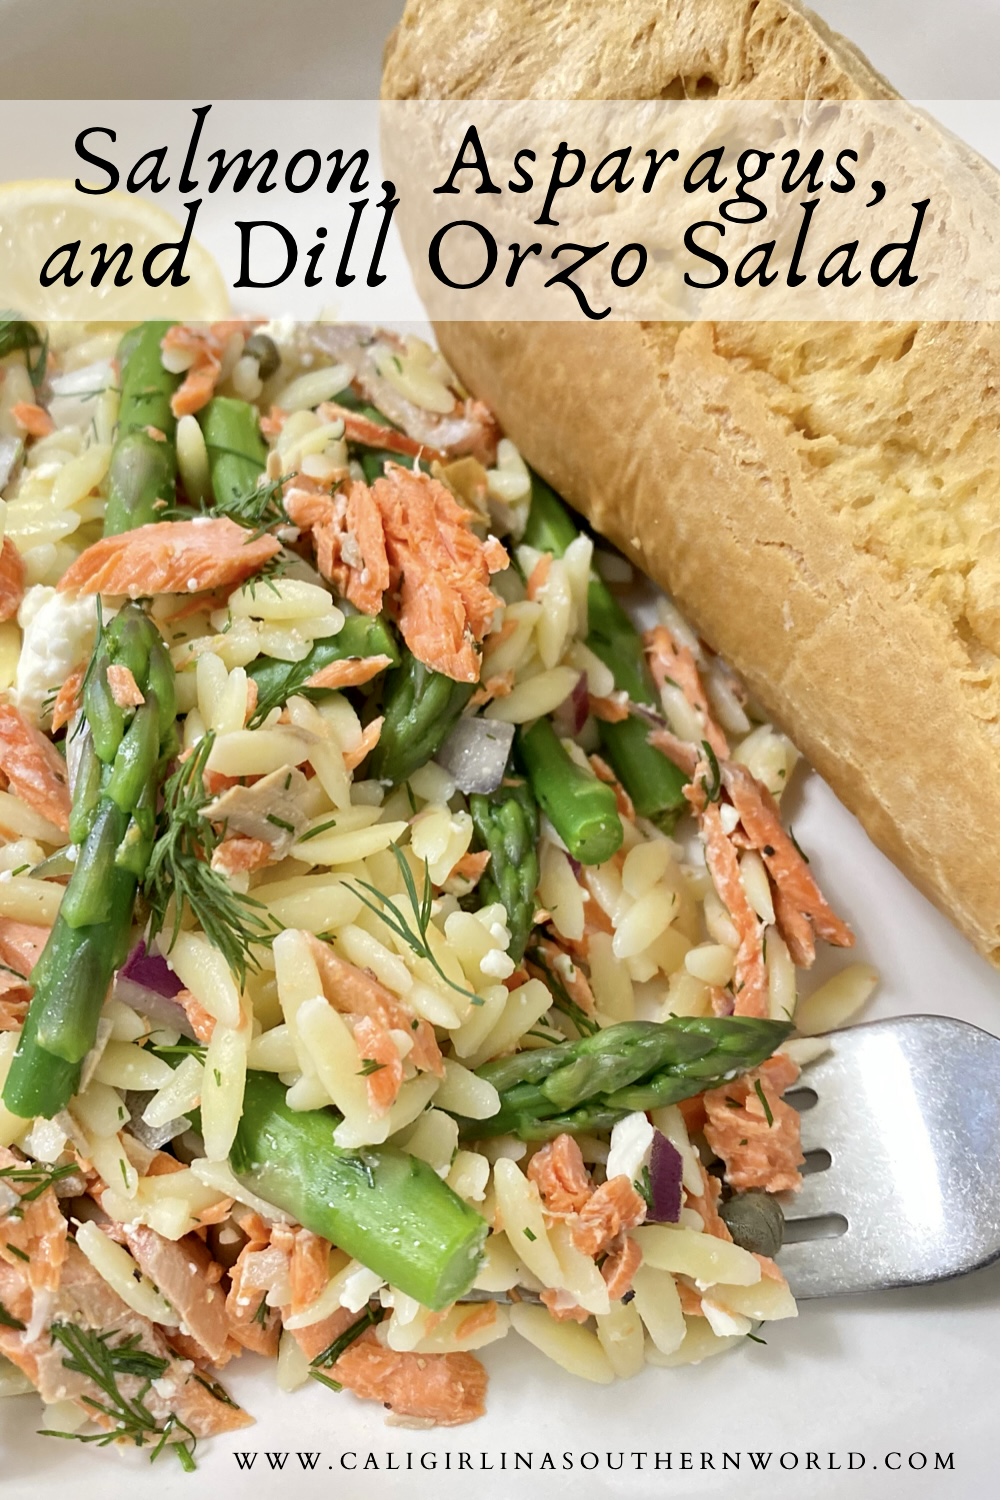 Pinterest Pin for Salmon, Asparagus, and Dill Orzo Salad.